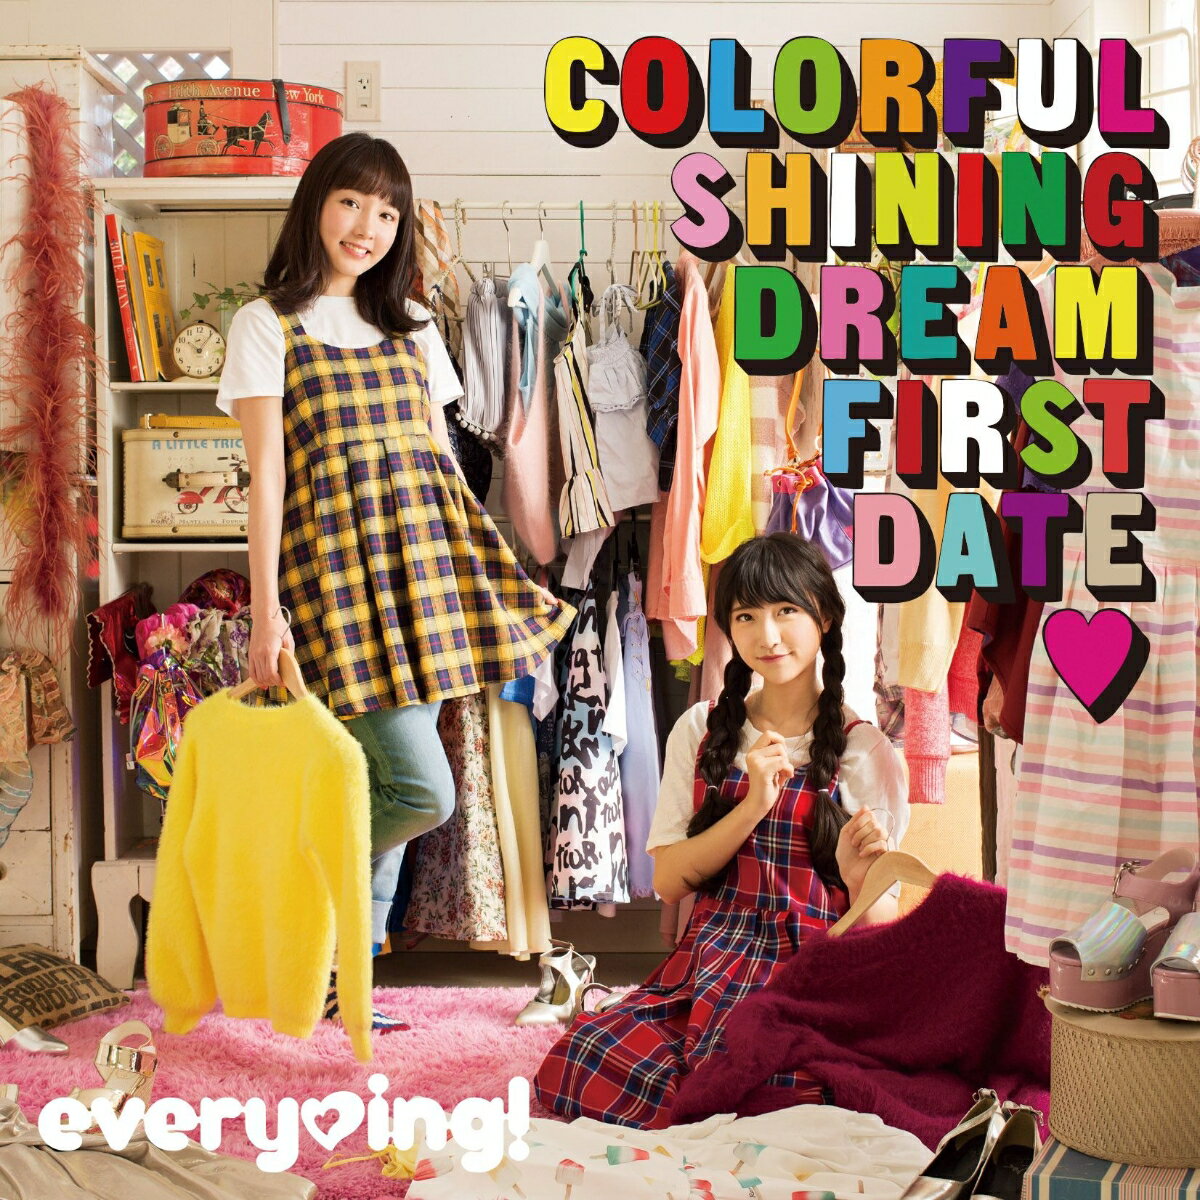 Colorful Shining Dream First Date♥ [ every ing! ]